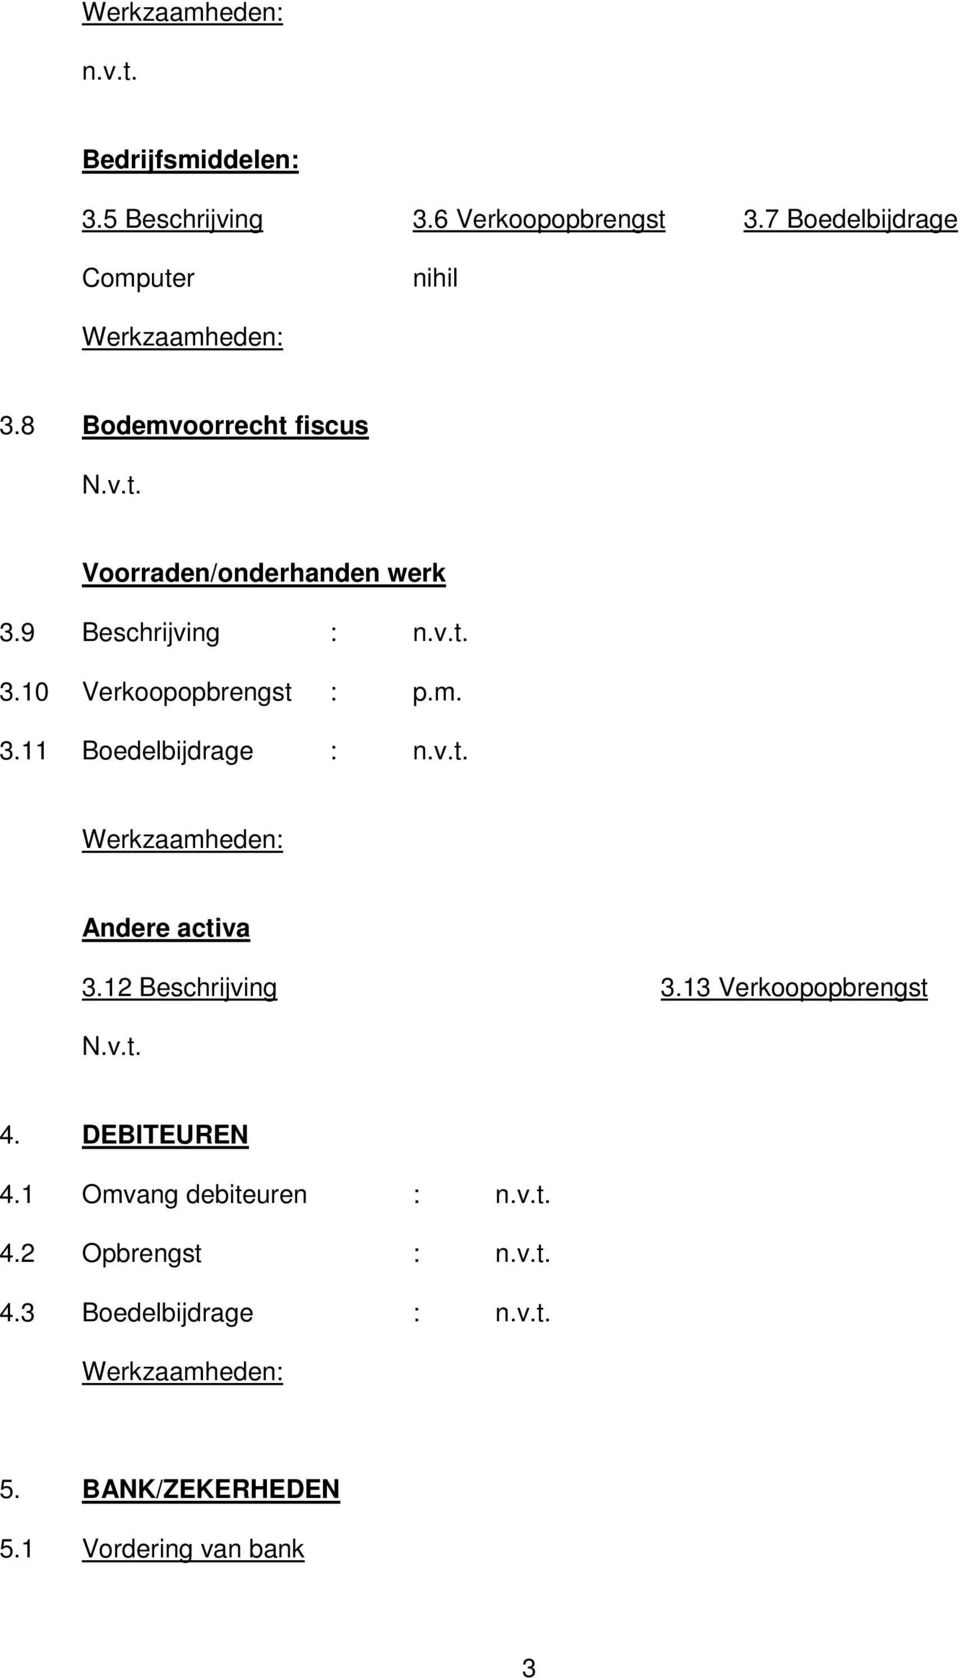 v.t. Andere activa 3.12 Beschrijving 3.13 Verkoopopbrengst 4. DEBITEUREN 4.1 Omvang debiteuren : n.v.t. 4.2 Opbrengst : n.